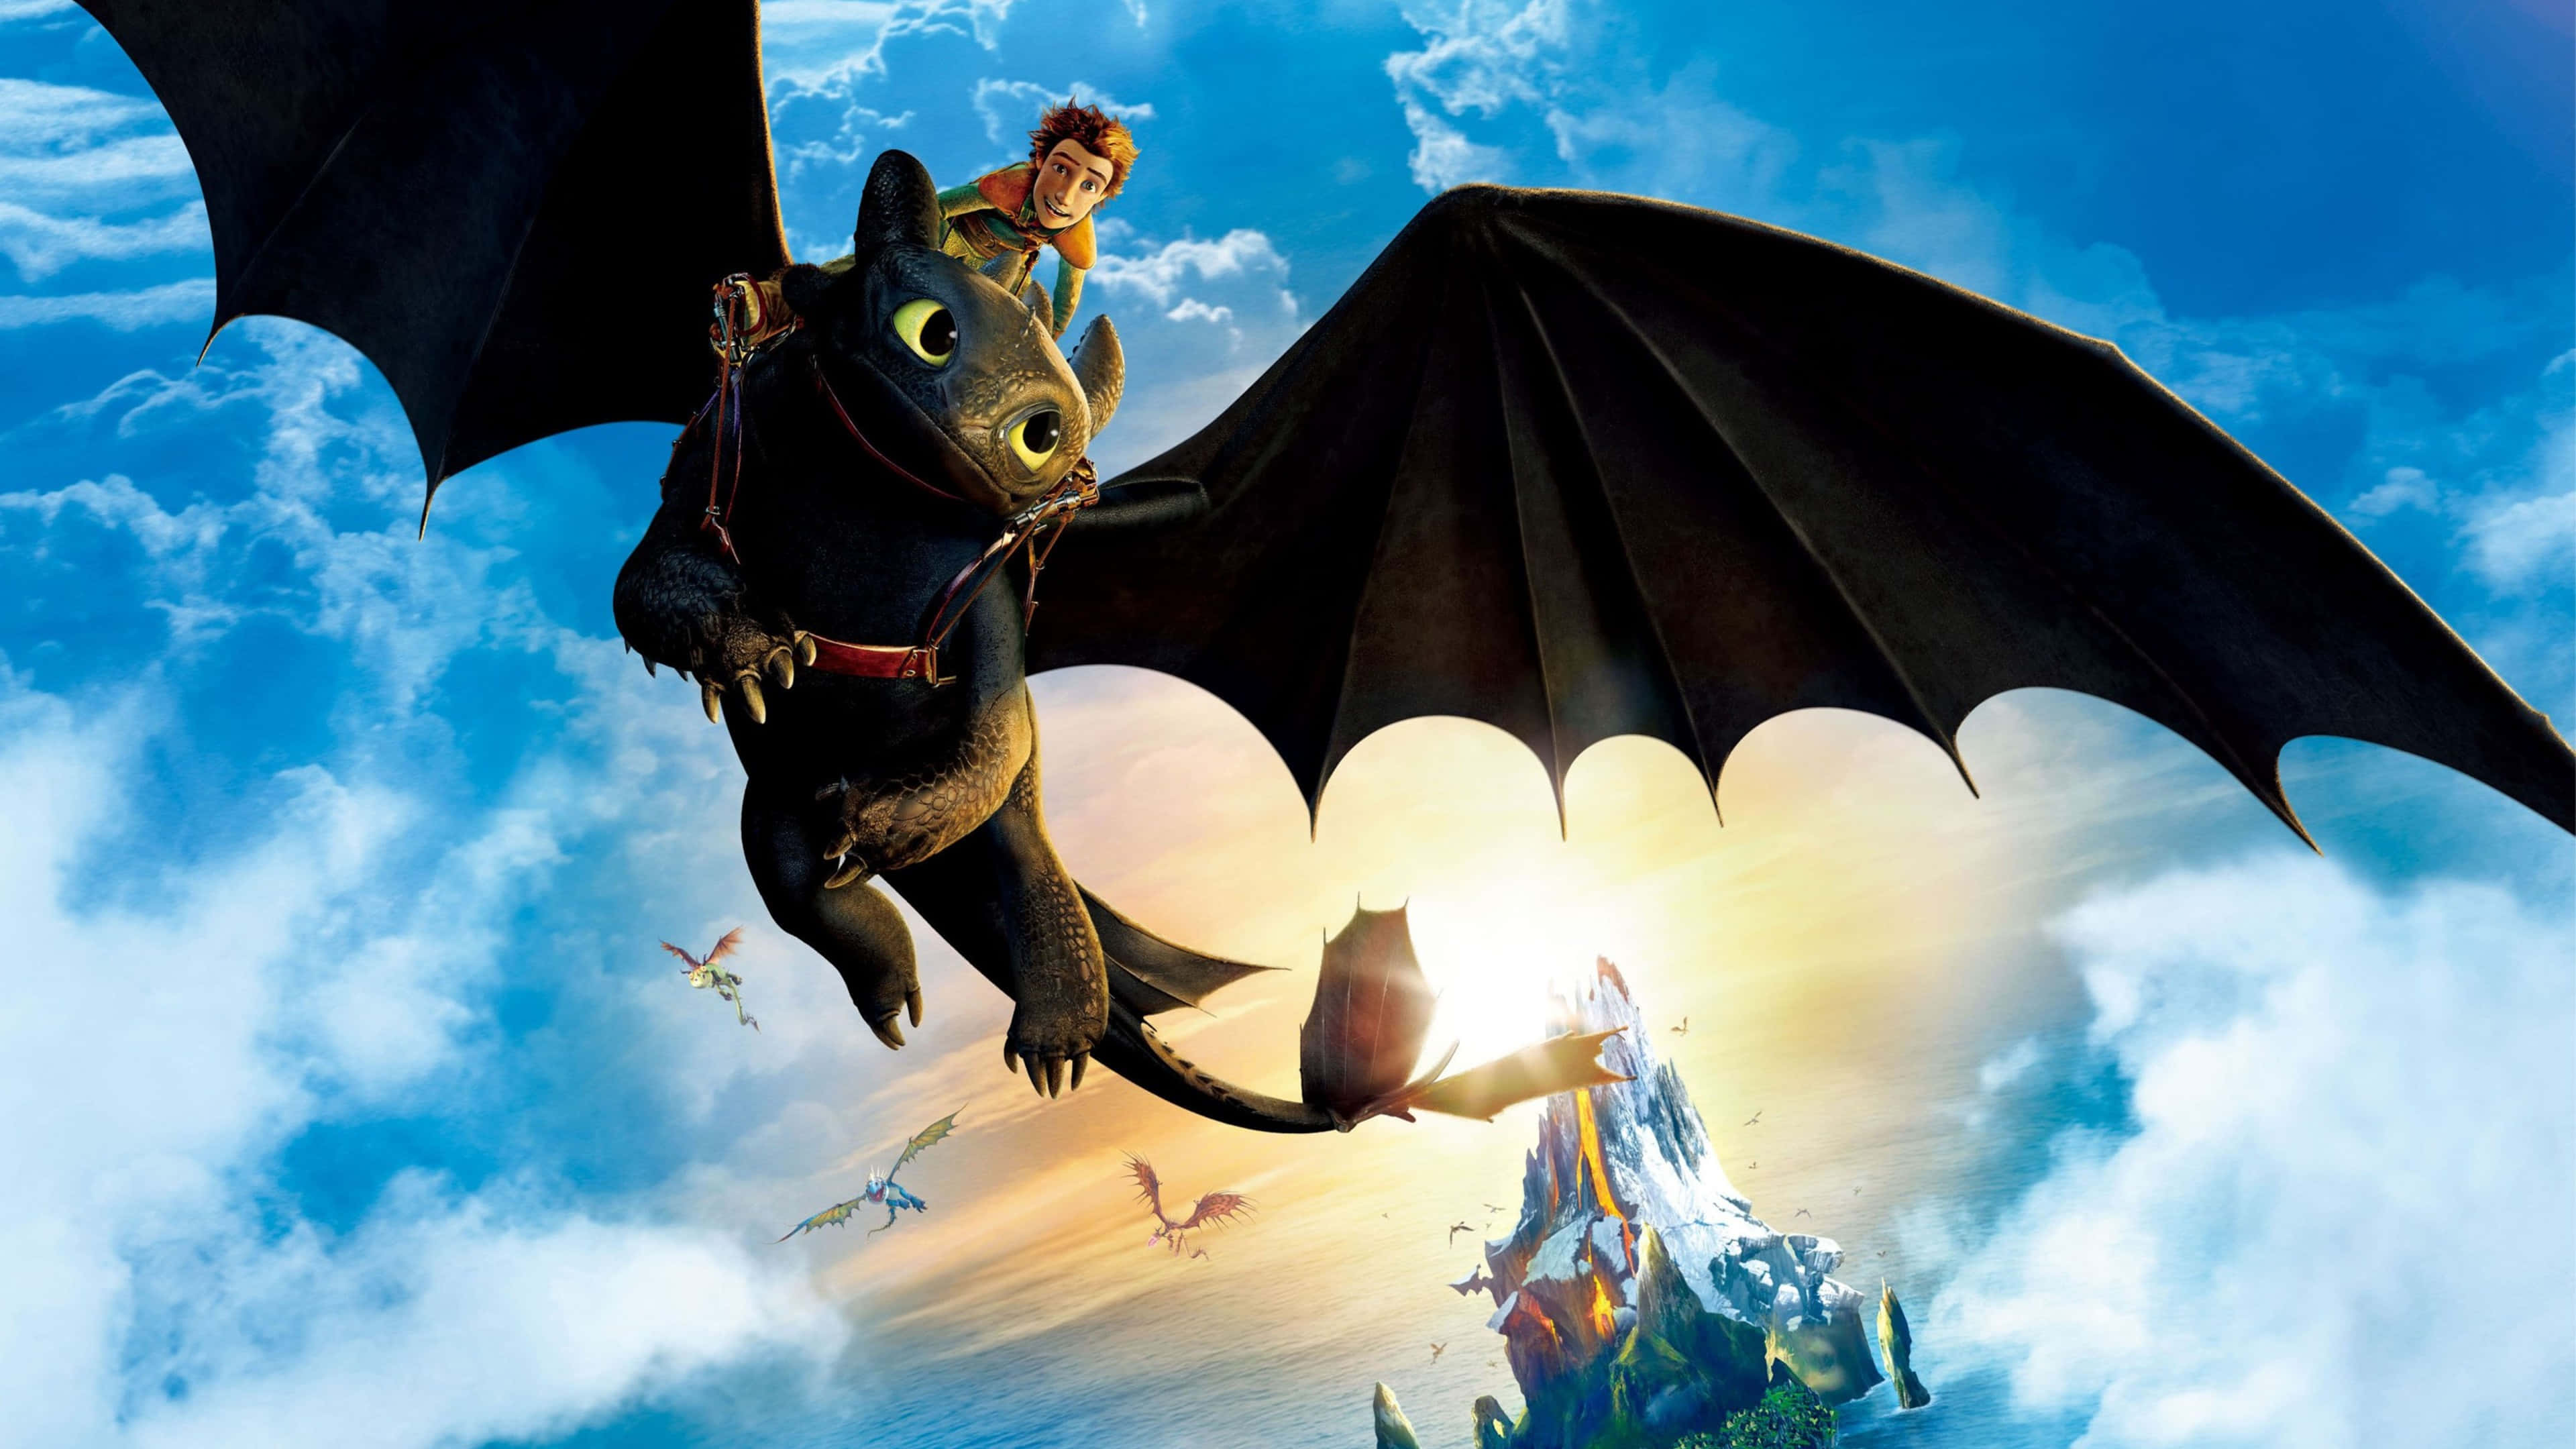 Ready for another wild adventure with Hiccup and Toothless? Wallpaper